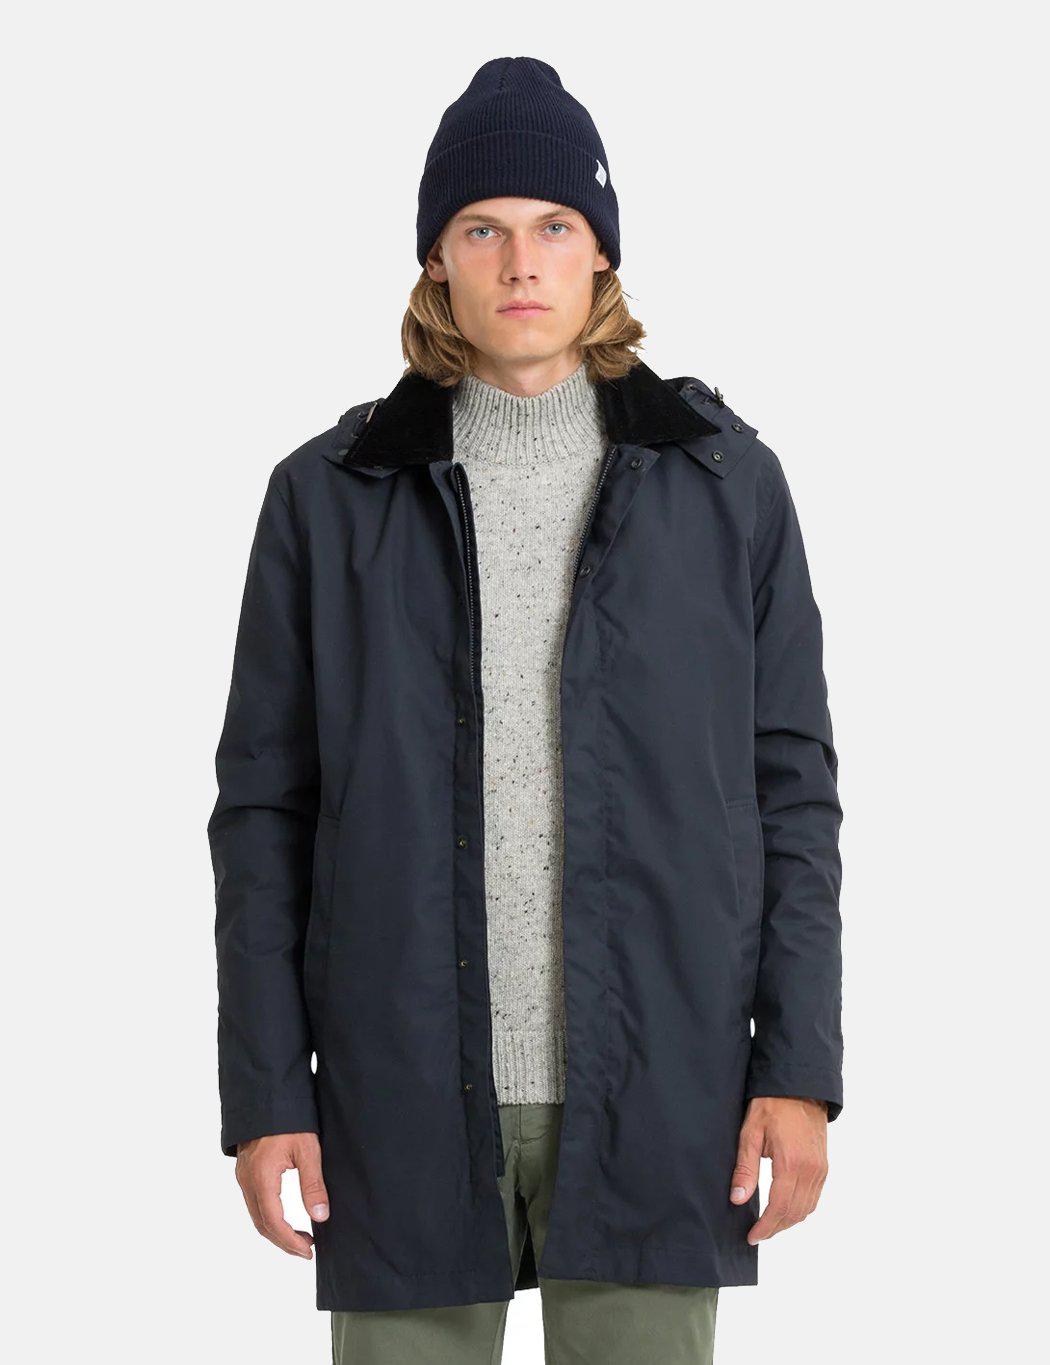 norse projects trondheim waxed cotton jacket